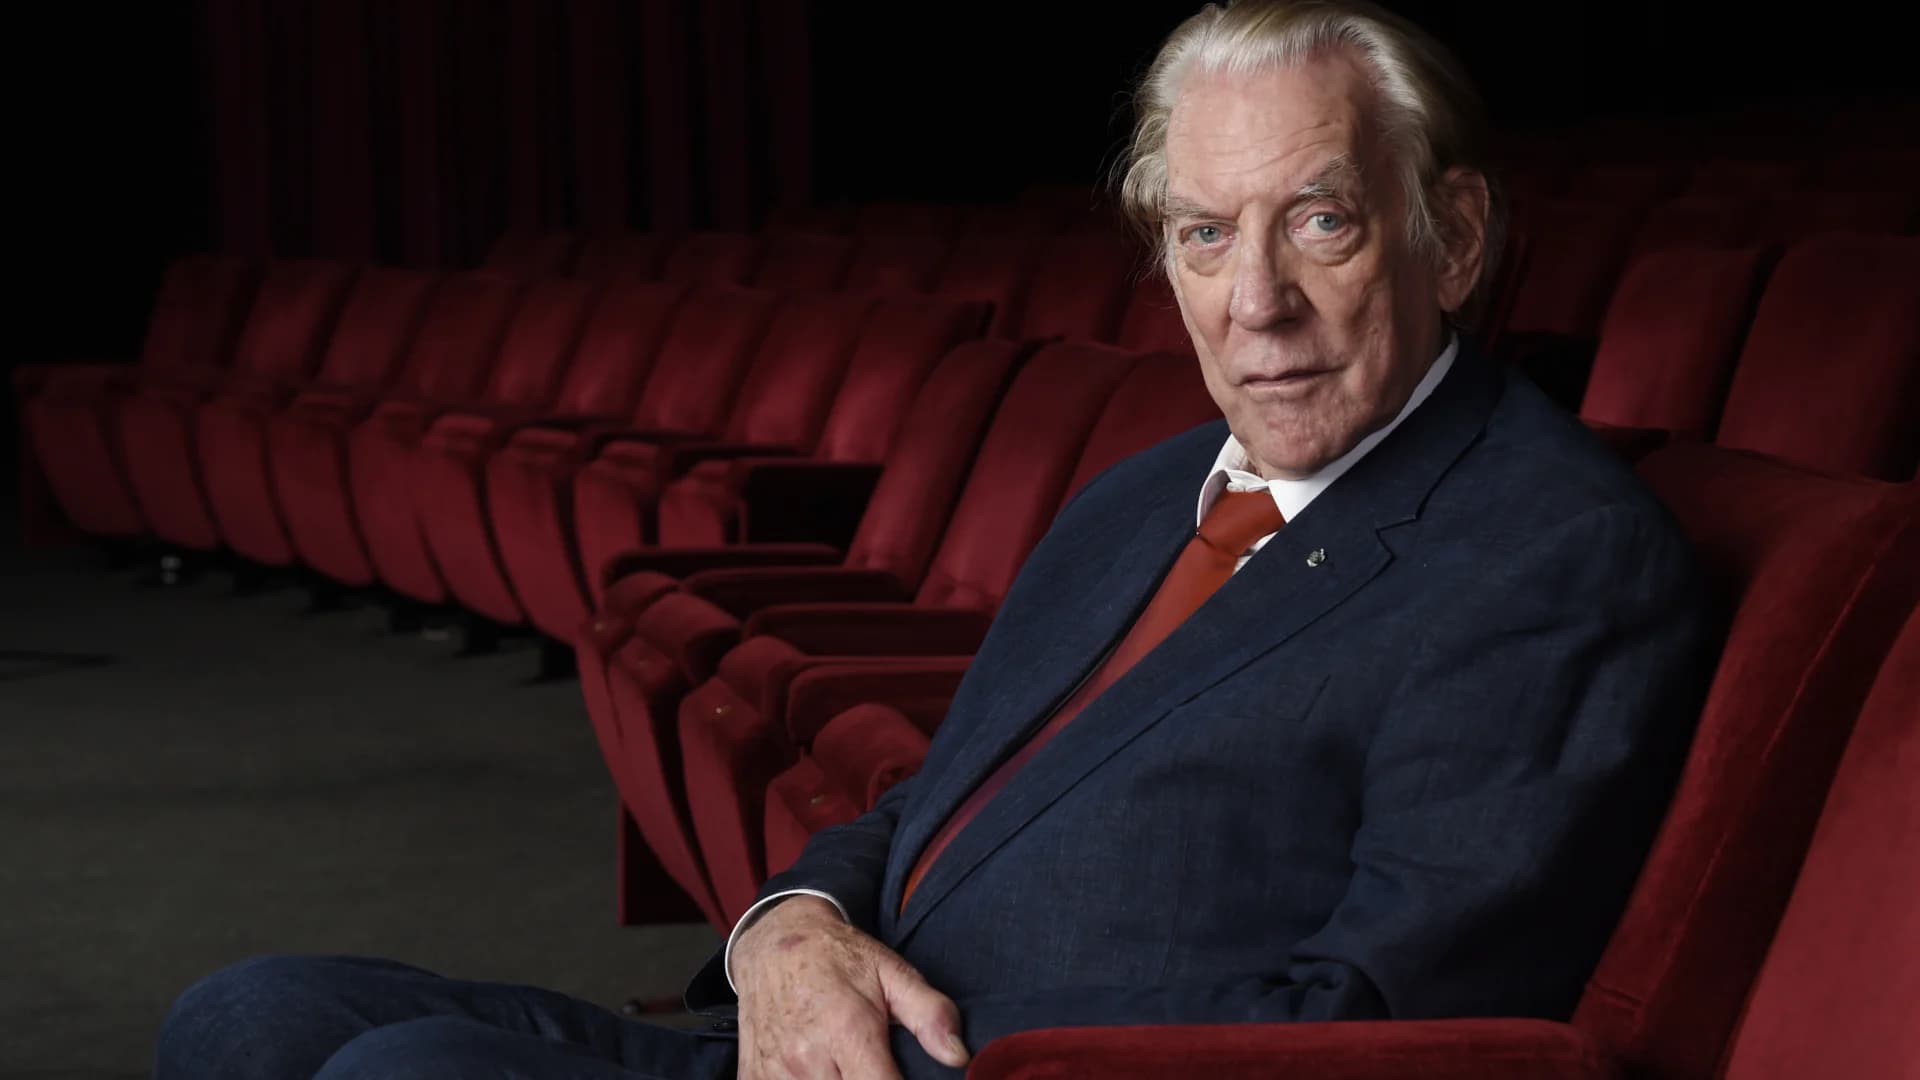 Donald Sutherland, the towering actor whose career spanned 'M.A.S.H.' to 'Hunger Games,' dies at 88